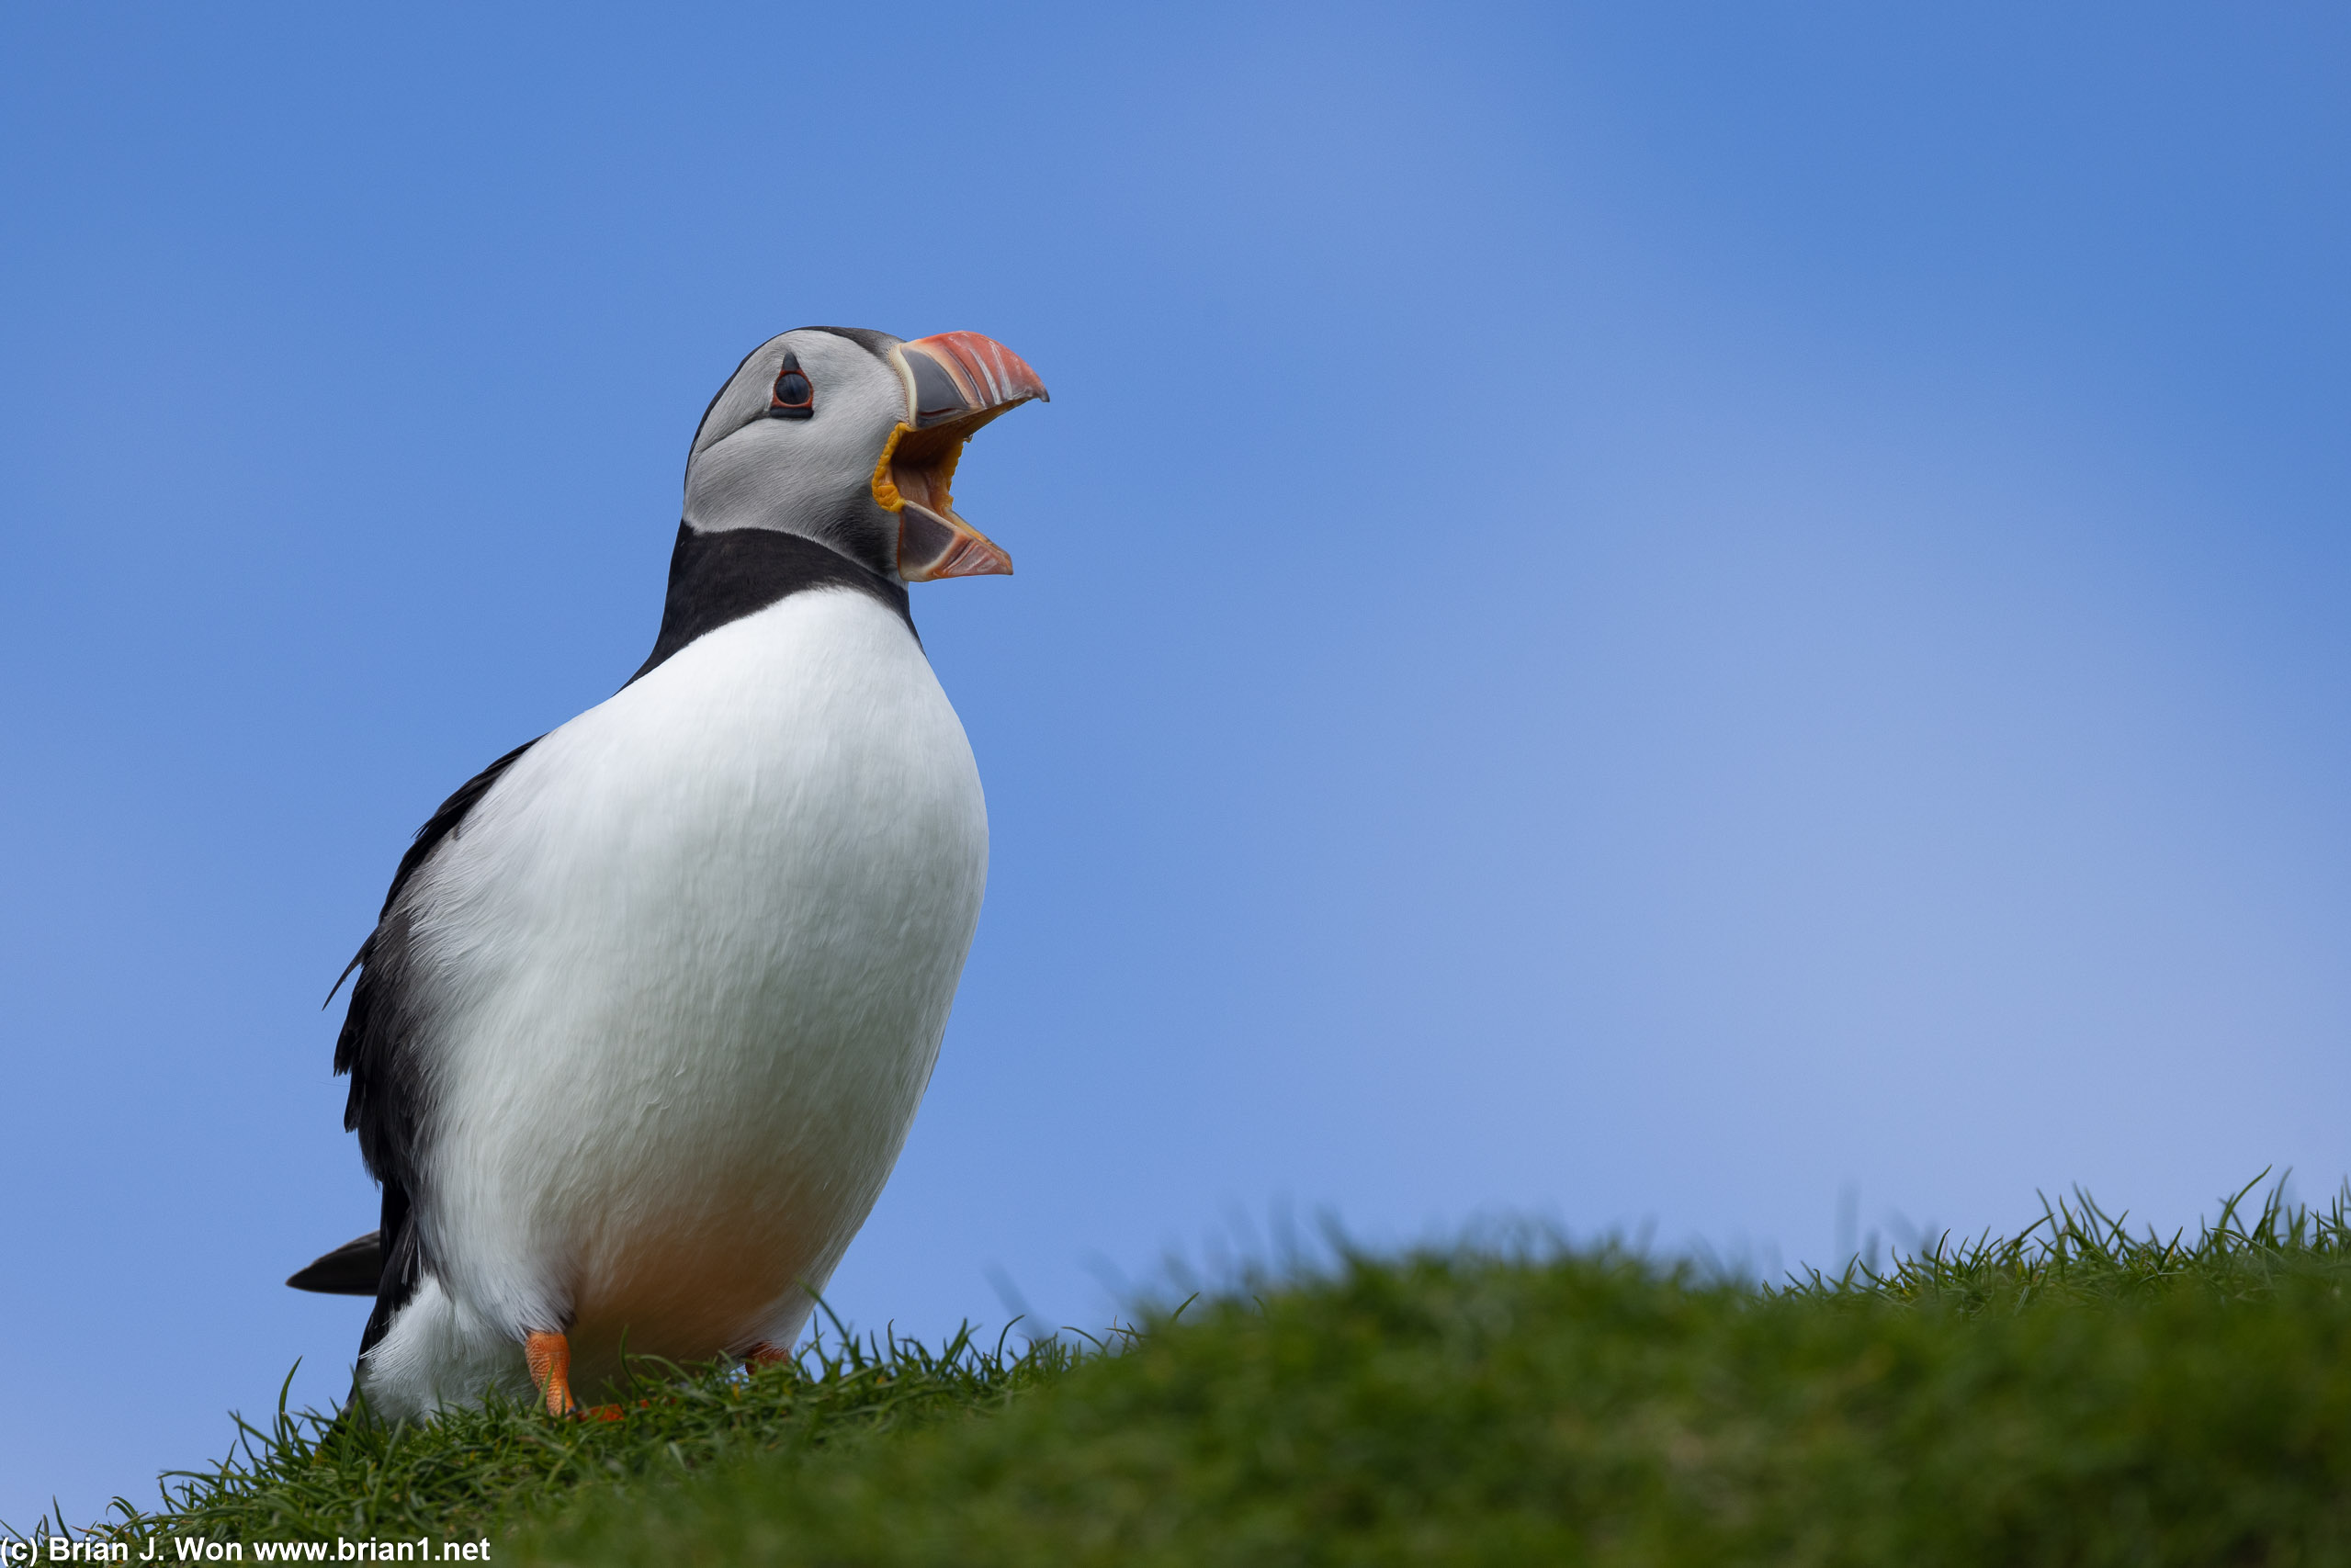 Puffins calling, take two.